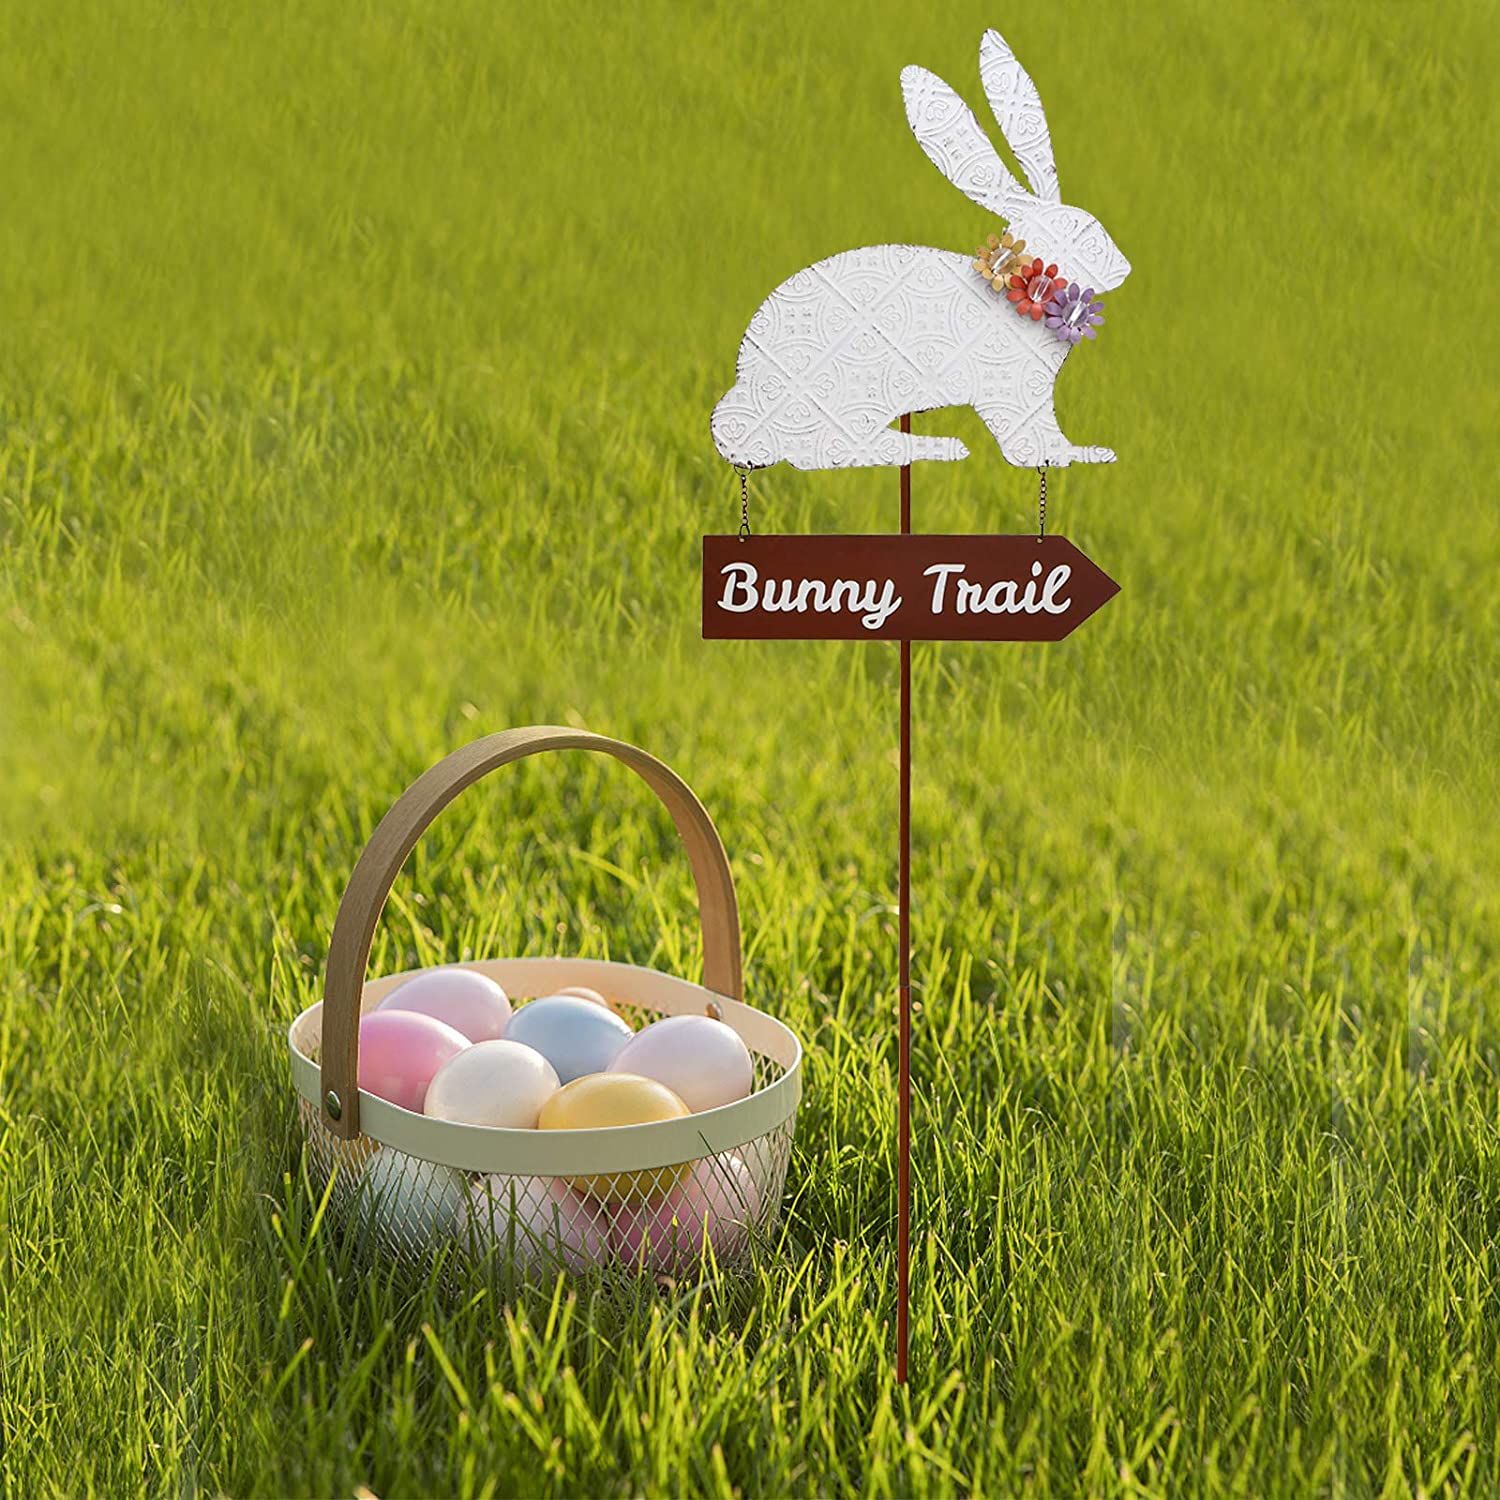 Easter Bunny Yard Stake, Outdoor Metal Easter Bunny Garden Stake Statue Décor Easter Yard Sign Decoration Outdoor for Easter Spring Holiday Lawn Patio Backyard Easter Home Garden Decor (White Bunny) - image 4 of 7